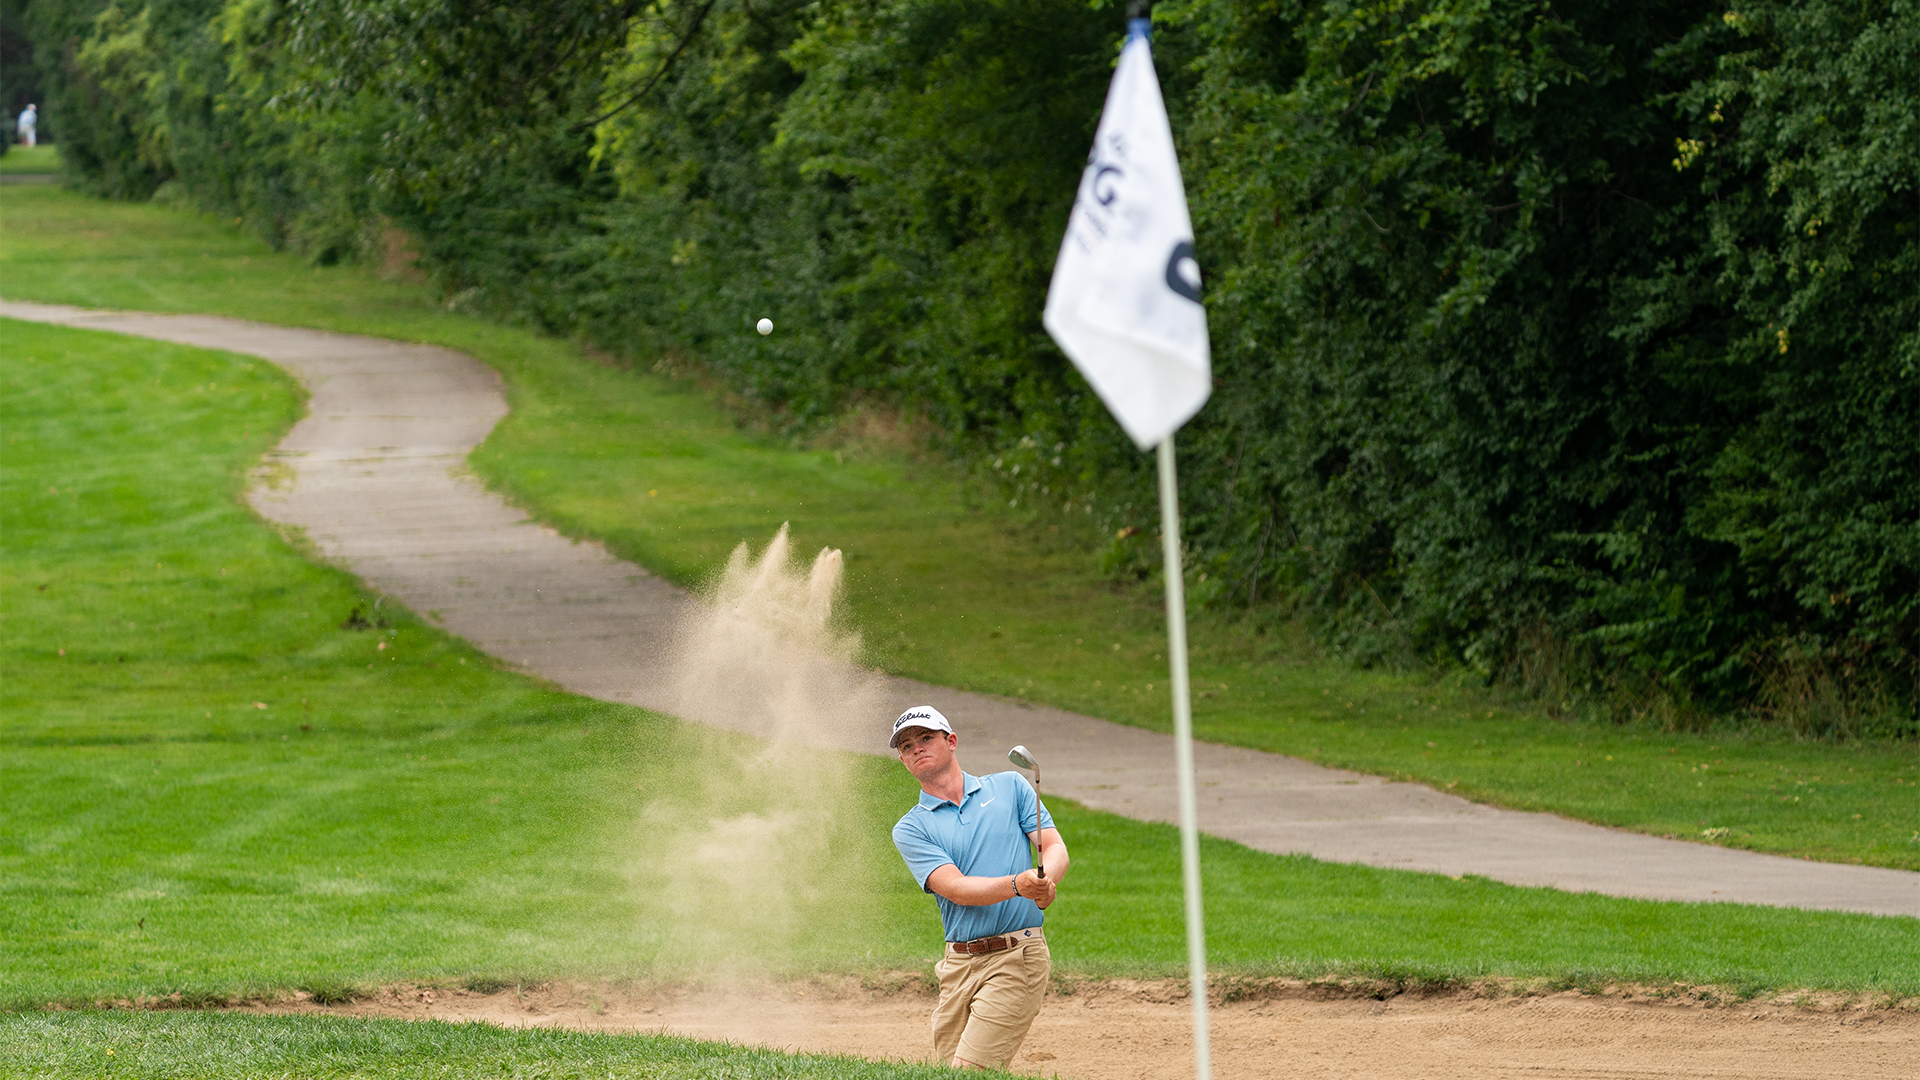 Nicholas Gross hits his shot from a bunker on the third hole during the second round for the 46th Boys and Girls Junior PGA Championship held at Cog Hill Golf & Country Club on August 3, 2022 in Lemont, Illinois. (Photo by Hailey Garrett/PGA of America)